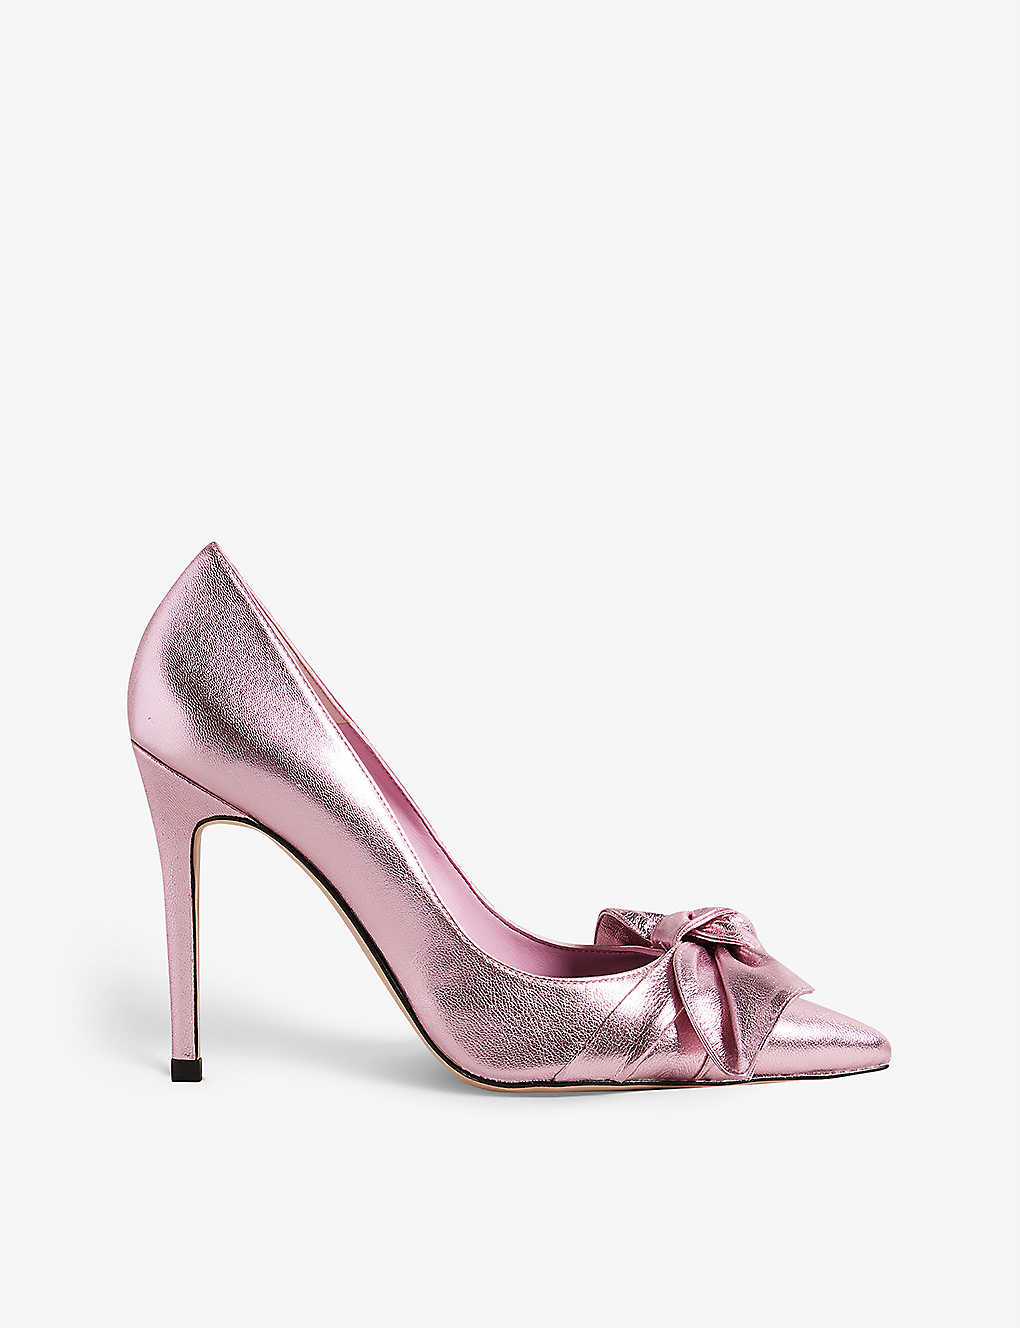 TED BAKER TED BAKER WOMEN'S LT-PINK SILVEYY BOW-EMBELLISHED LEATHER COURT HEELS,63198912